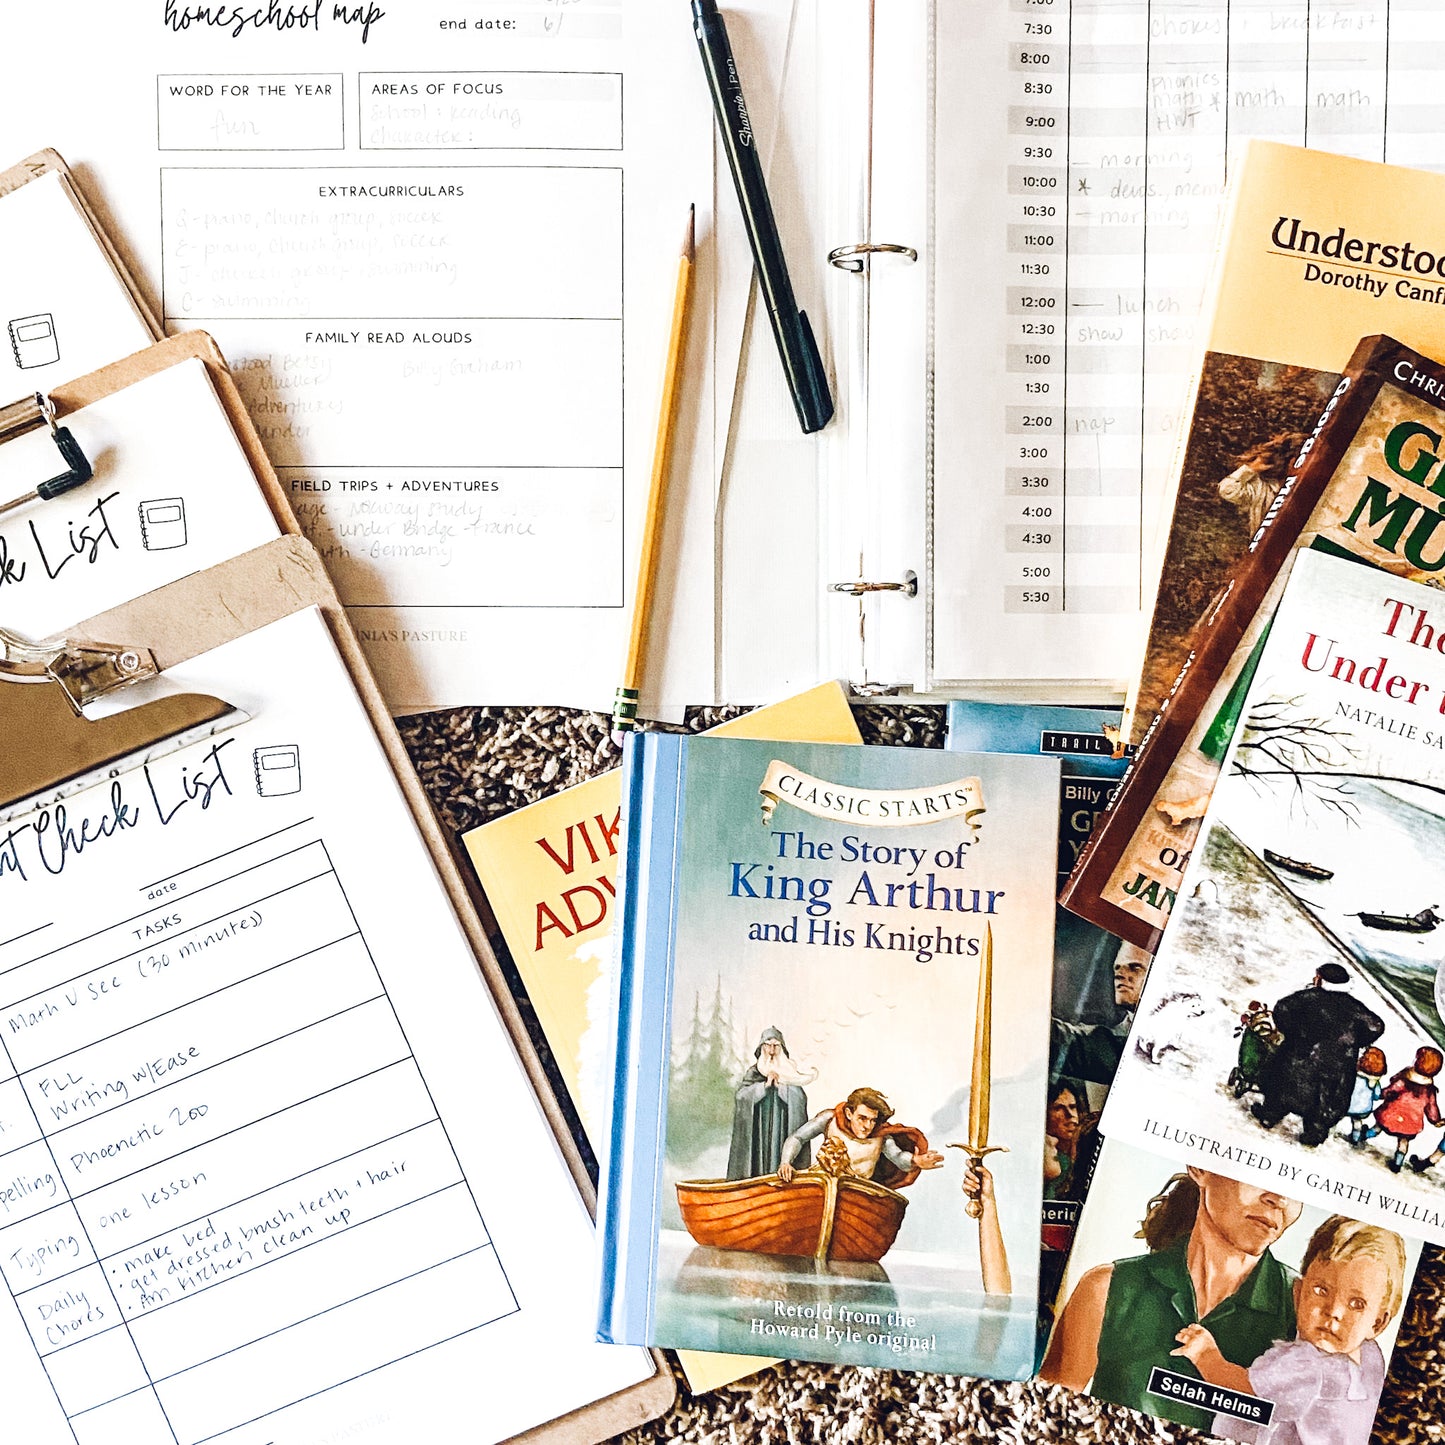 Homeschool Planning Pages Bundle